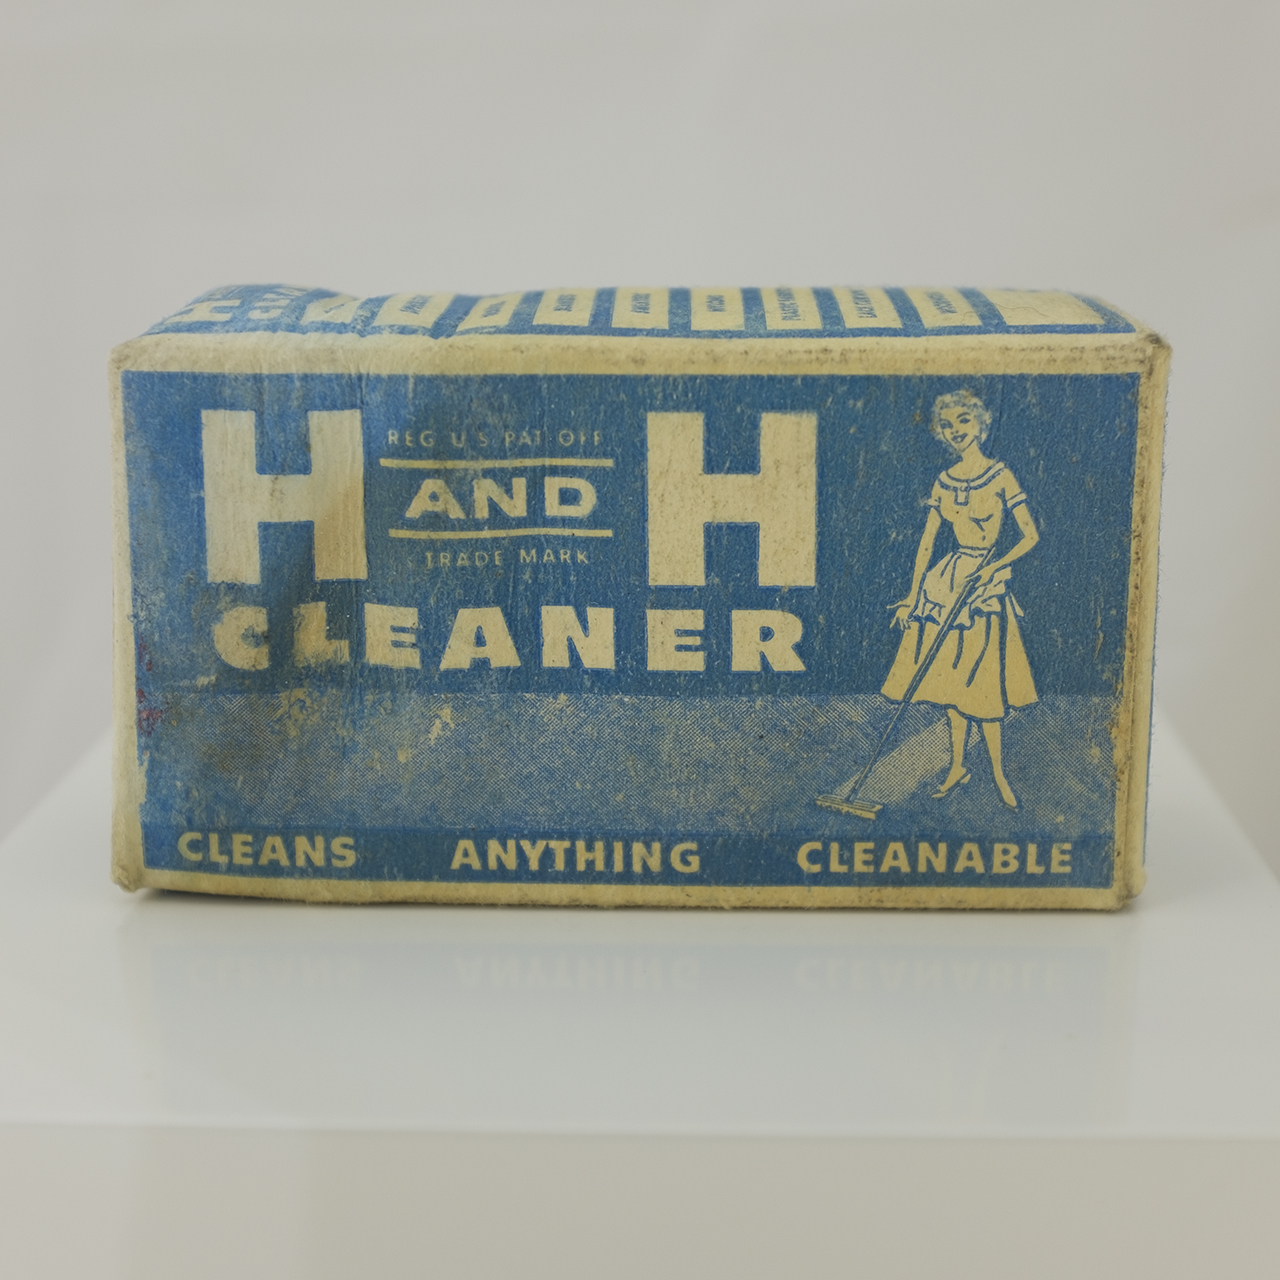 H and H Cleaner